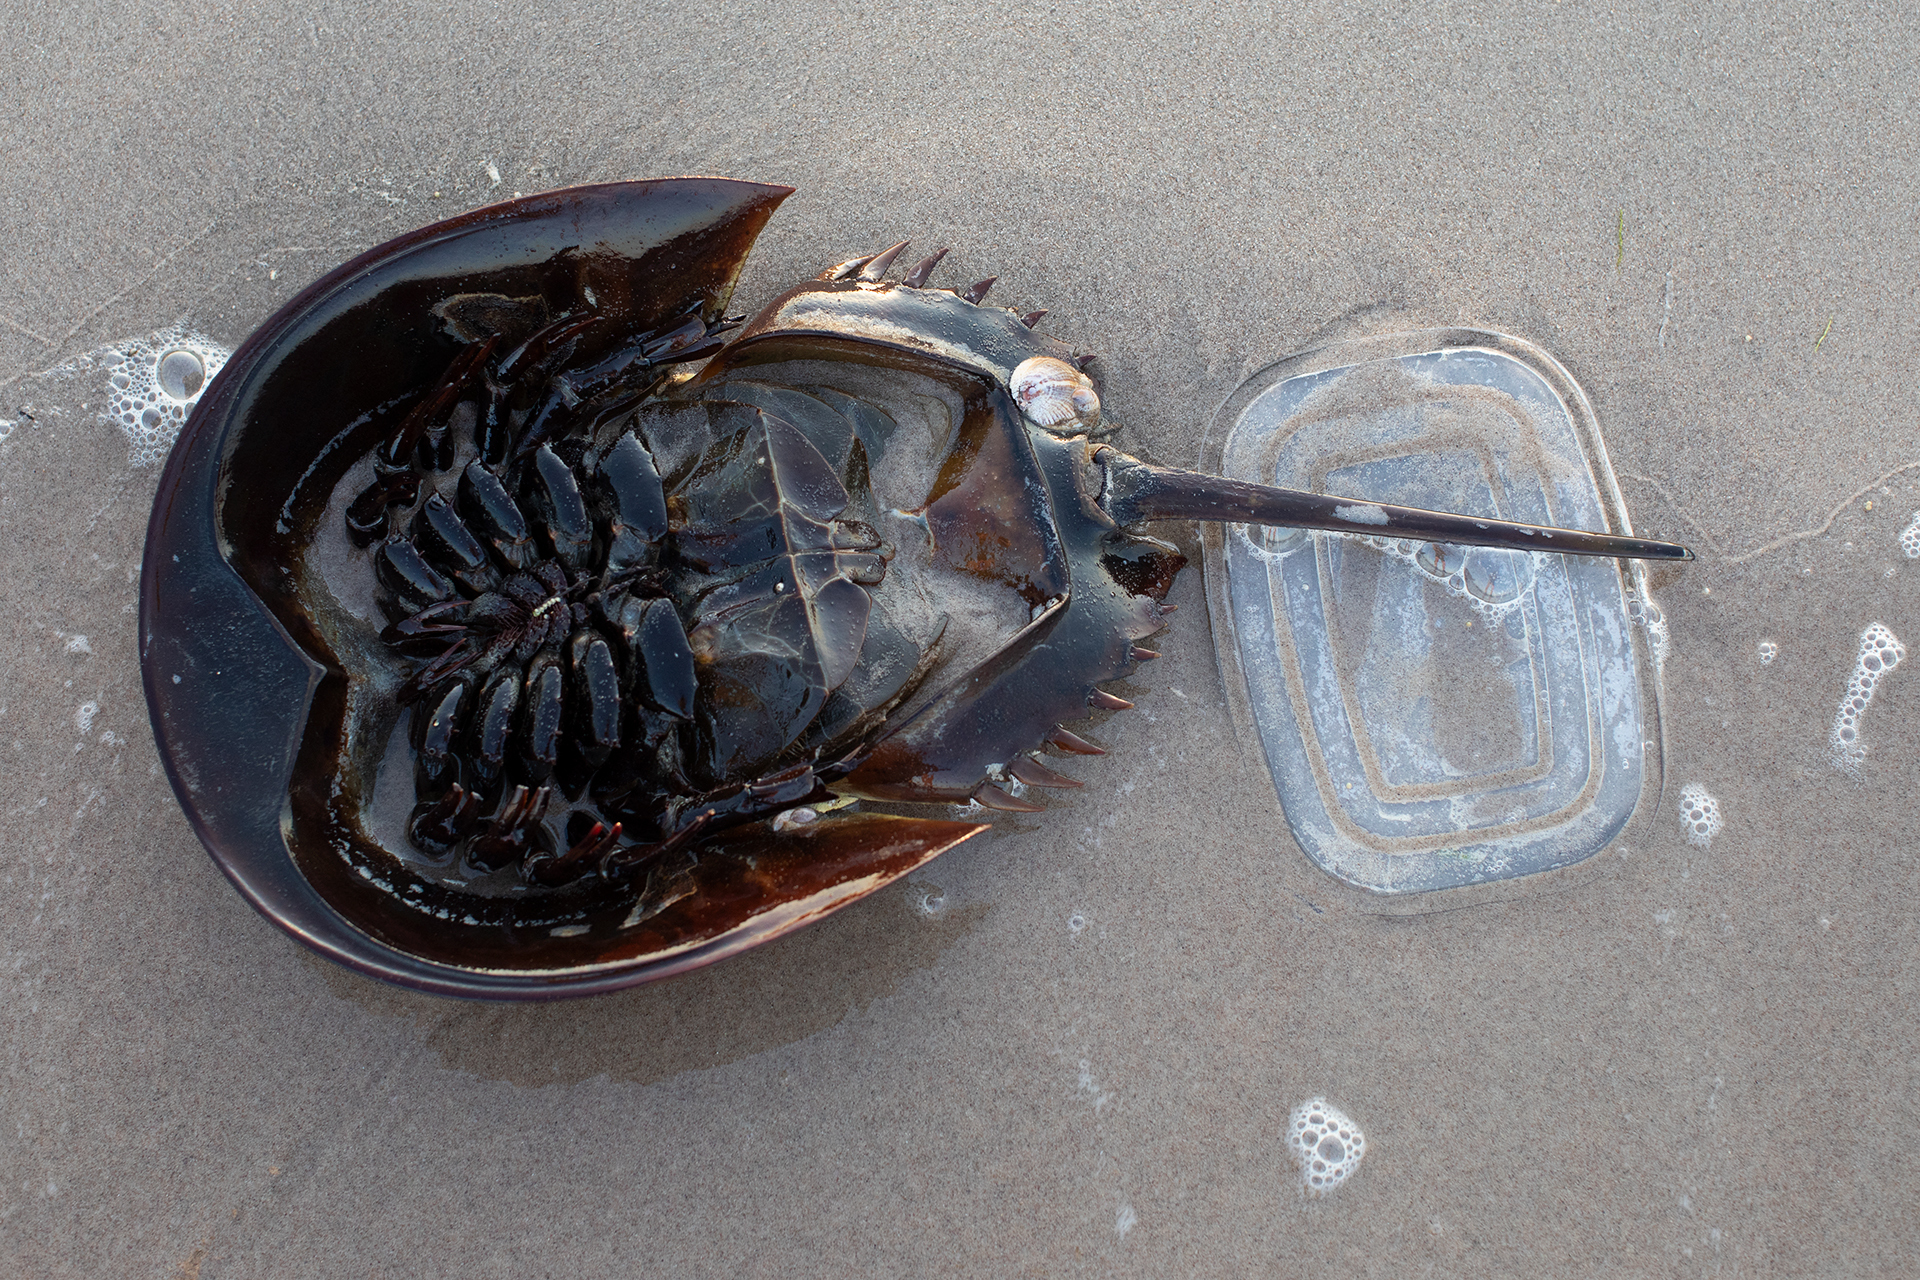 A dead horseshoe crab upside down on the beach next to the top of a plastic container.